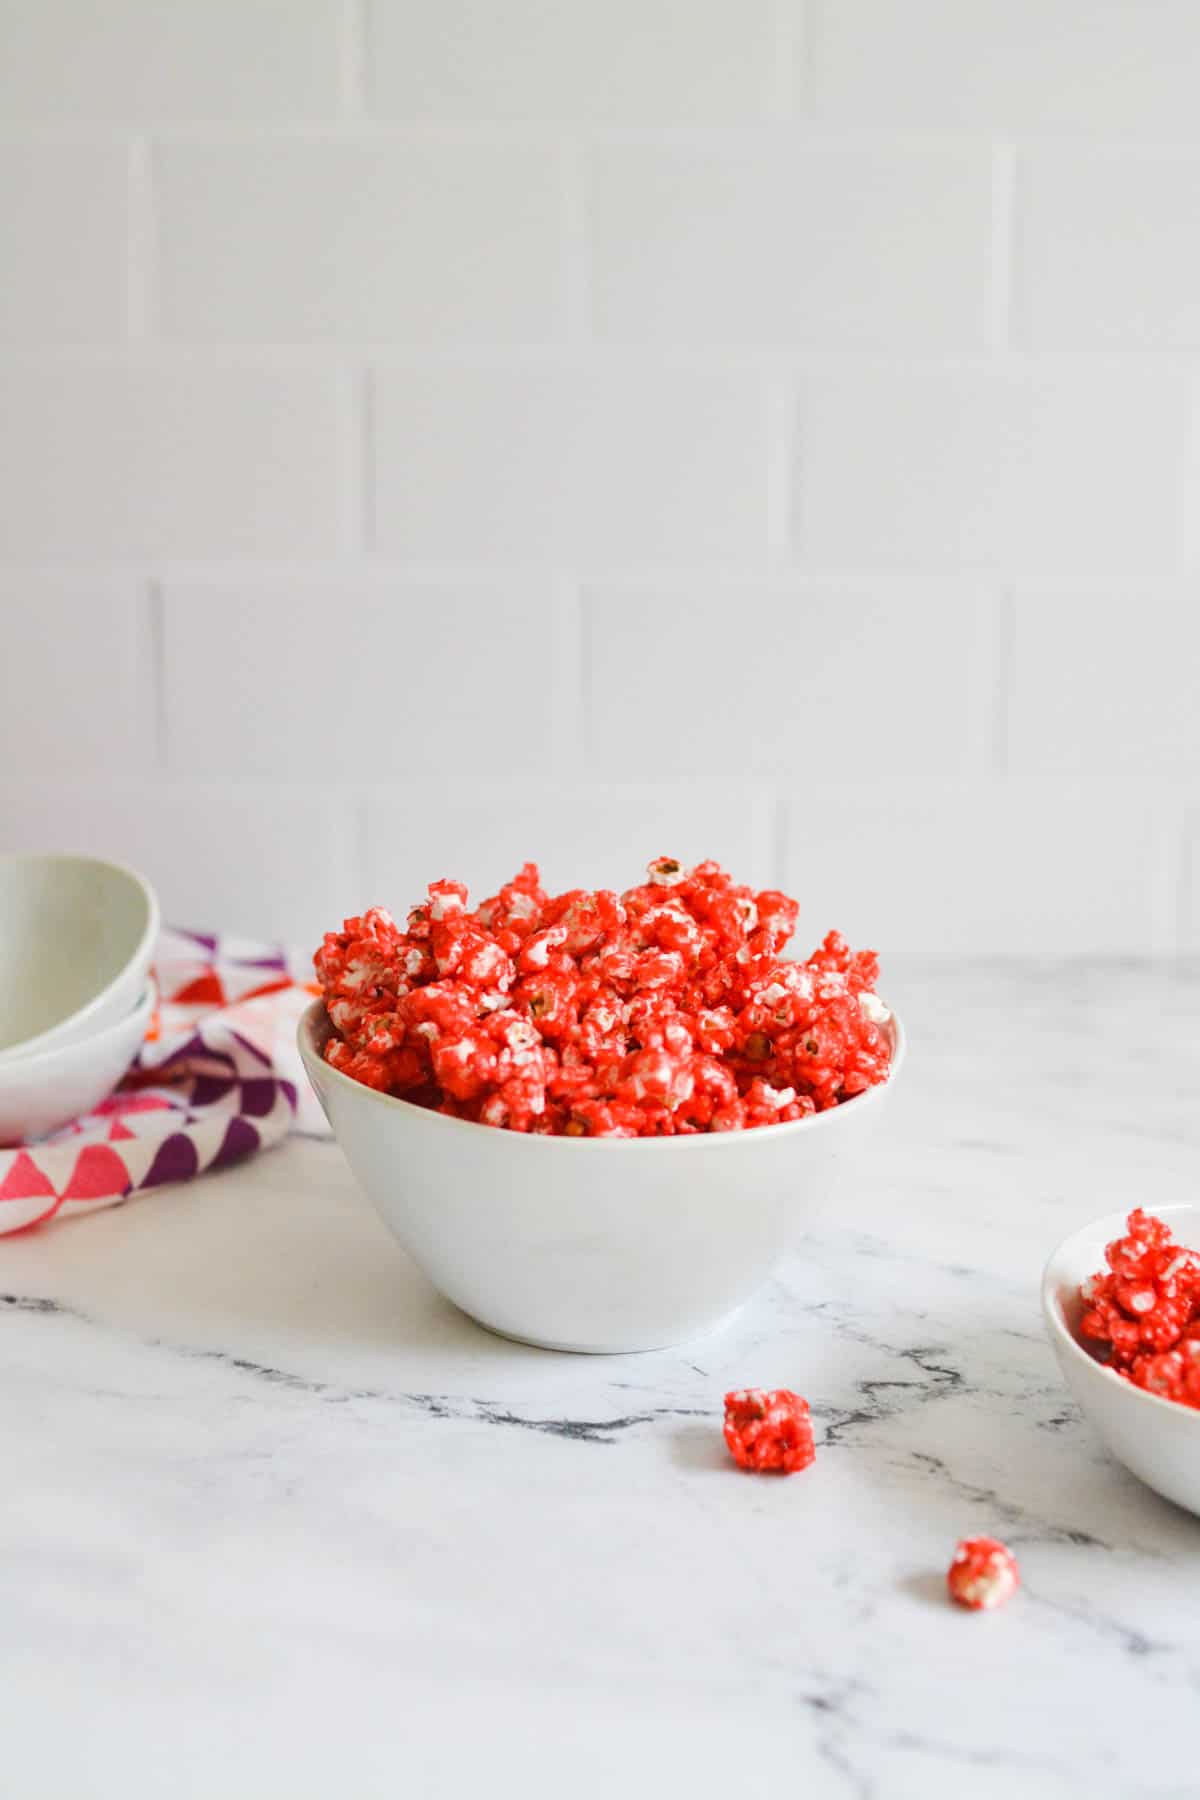 A bowl holding Cherry flavored popcorn on a counter.